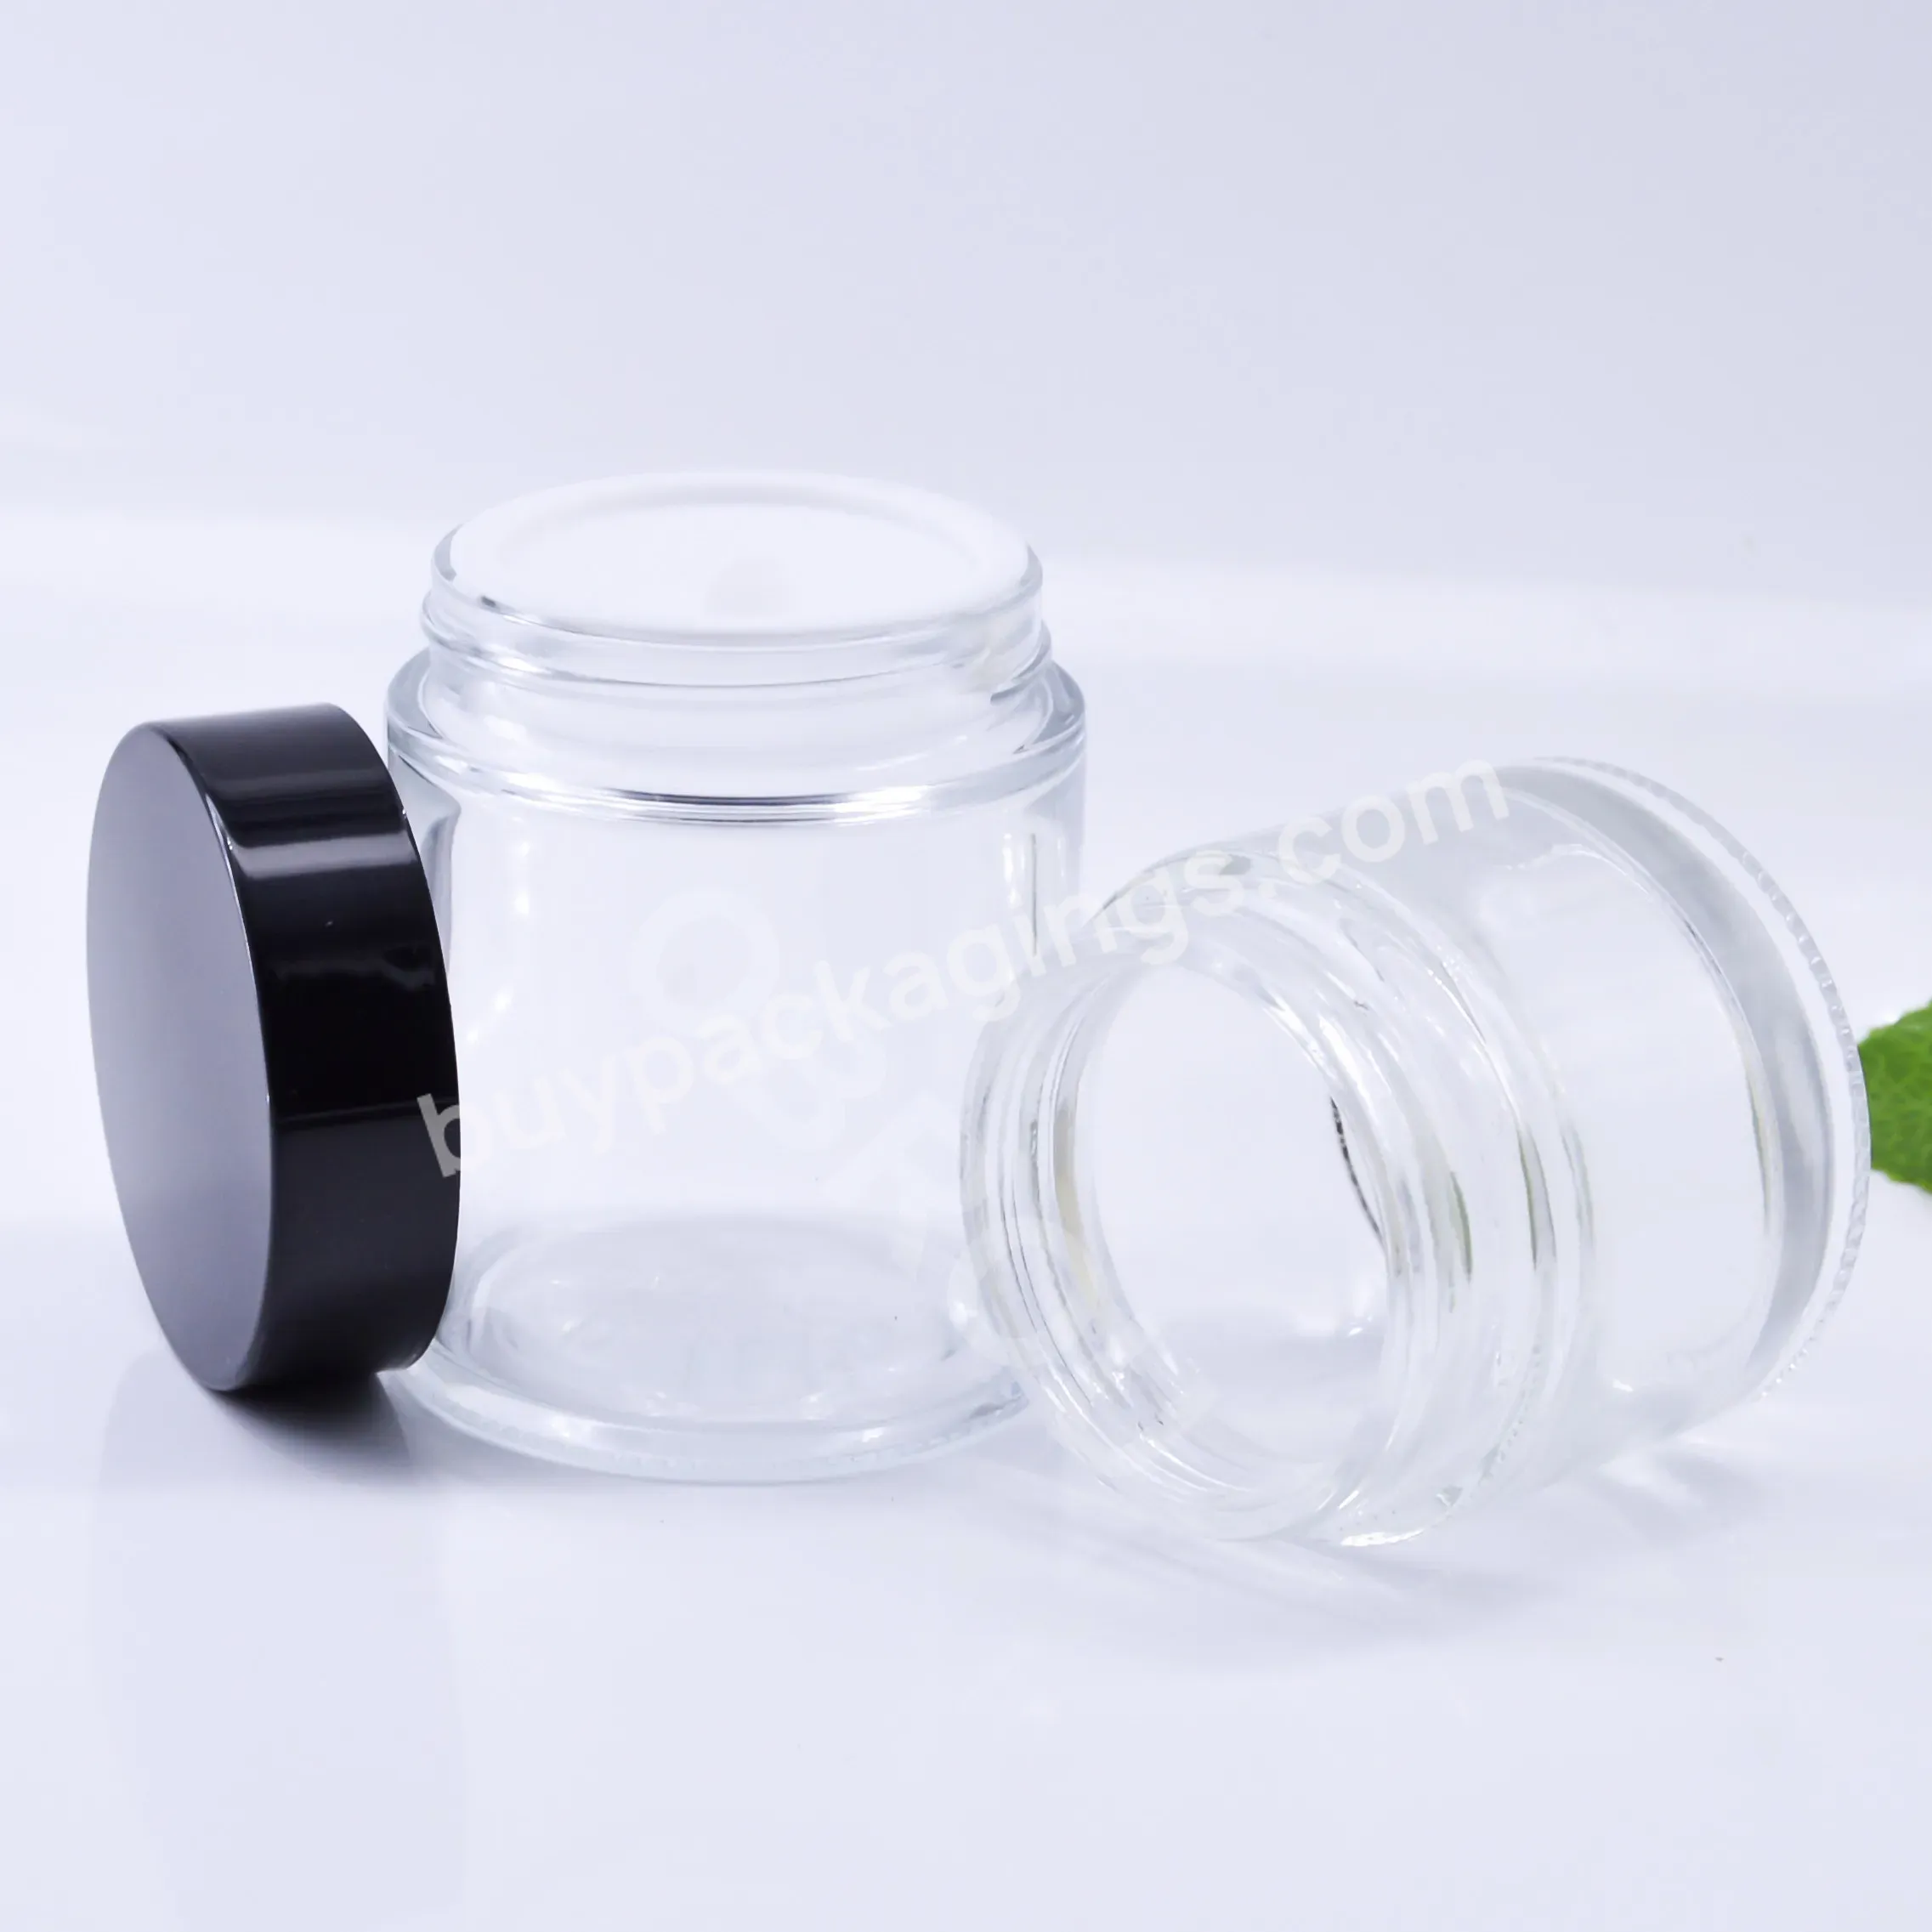 Buy Frosted Jars Glass Bottle Wholesale Small Amber Black Clear Cosmetic Cream Jar With Bamboo Wood Lid Wholesale - Buy Jars Glass Wholesale,Jars Wholesale,Glass Jar With Wood Lid.